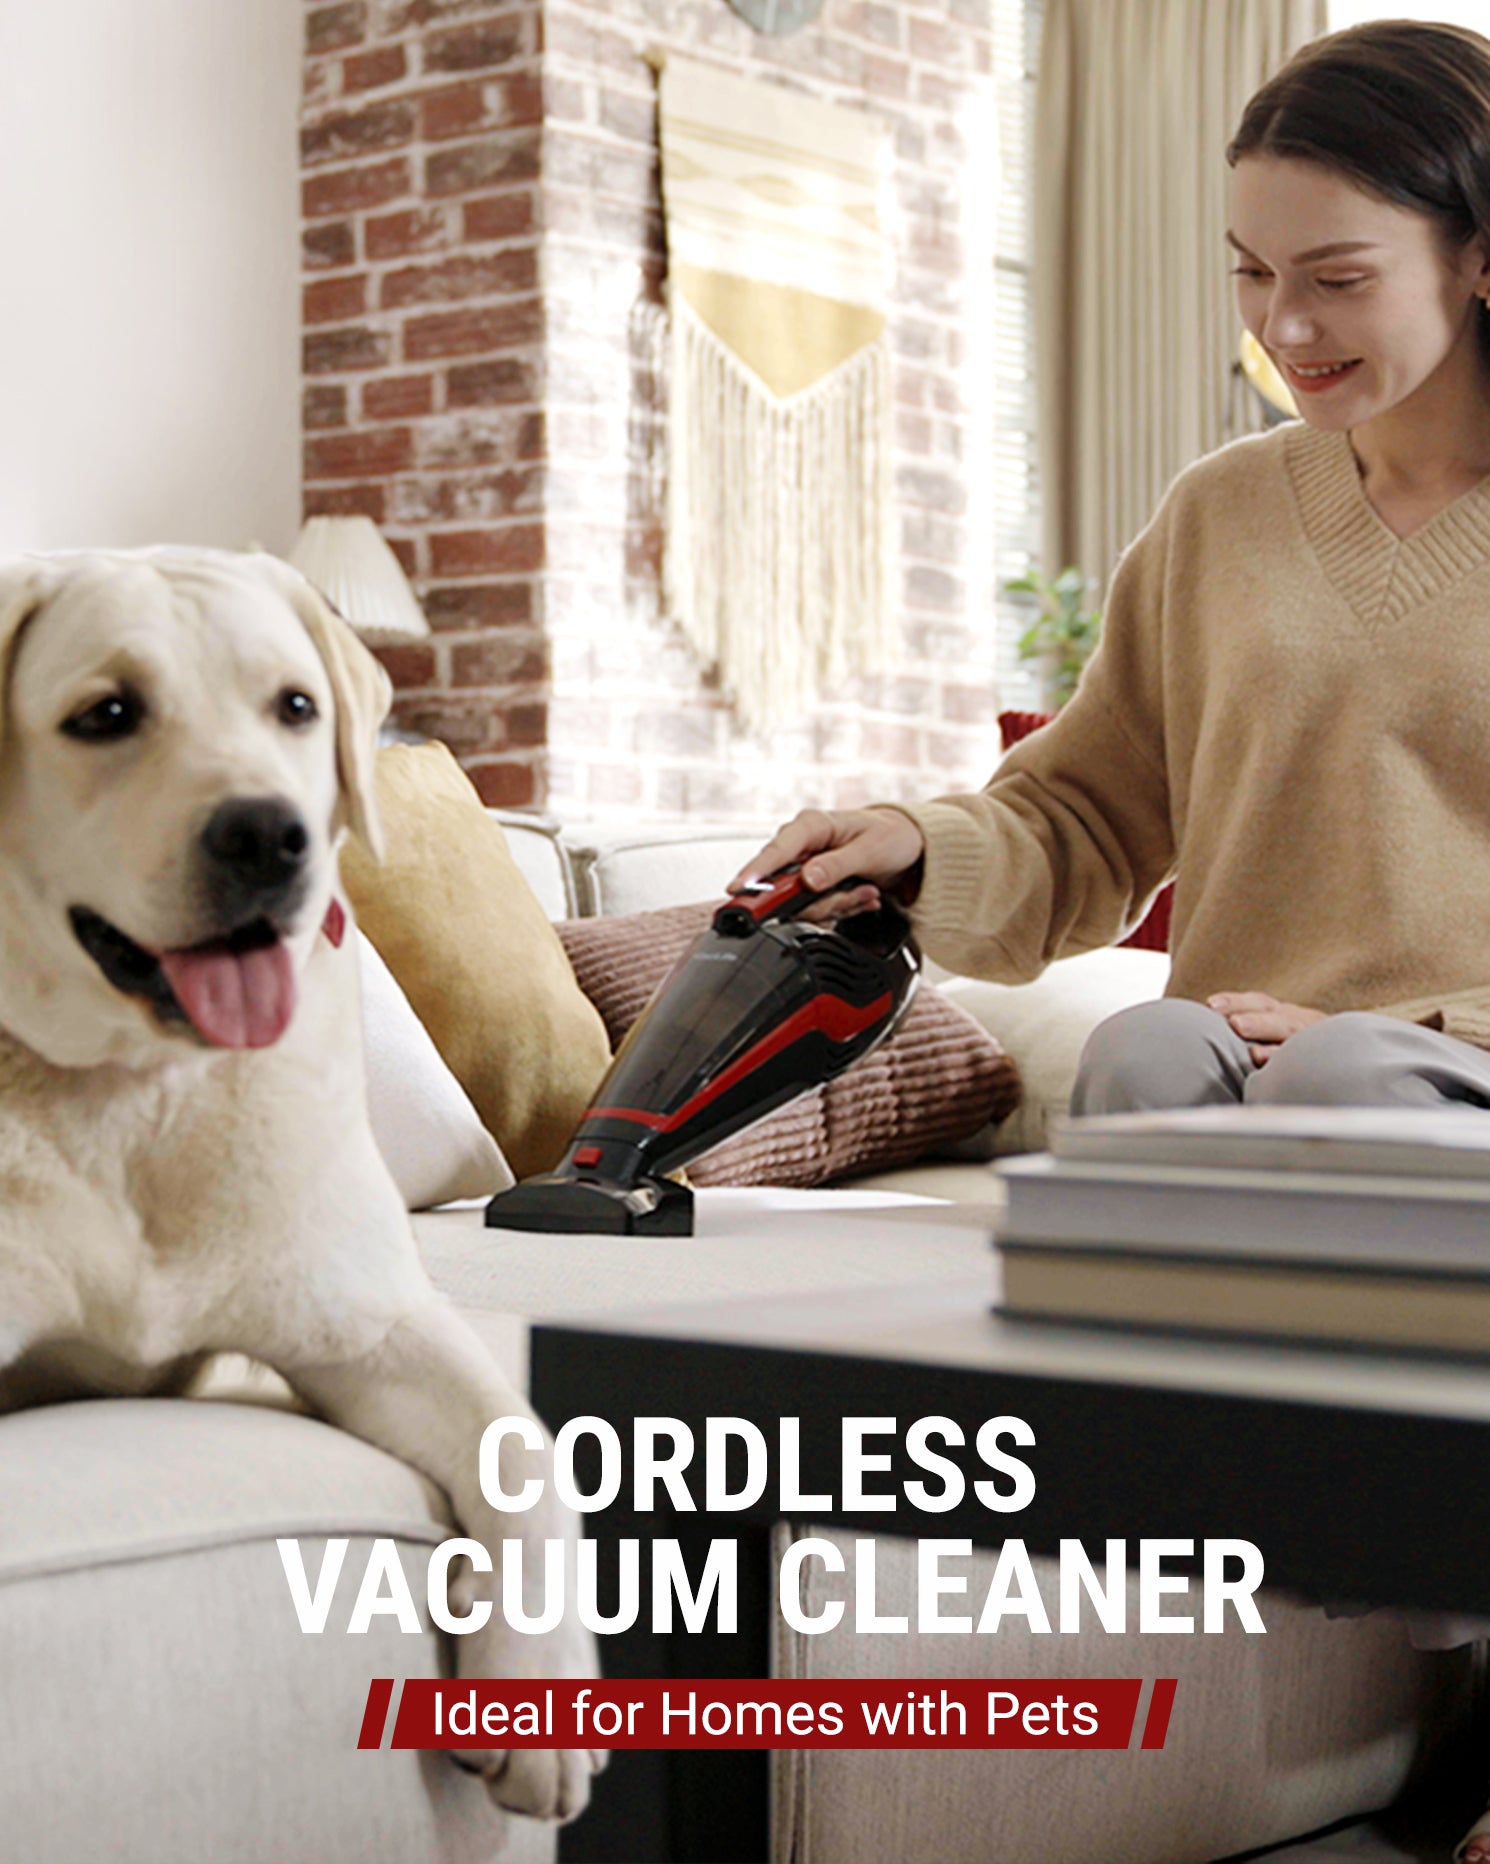 VacLife Handheld Vacuum for Pet Hair - Hand Car Vacuum Cordless Rechargeable, Well-Equipped Hand Held Vacuum with Reusable Filter & LED Light, Powerful Stair Vacuum with Motorized Brush, Red (VL726) - ASIN: B09HG9PS7F